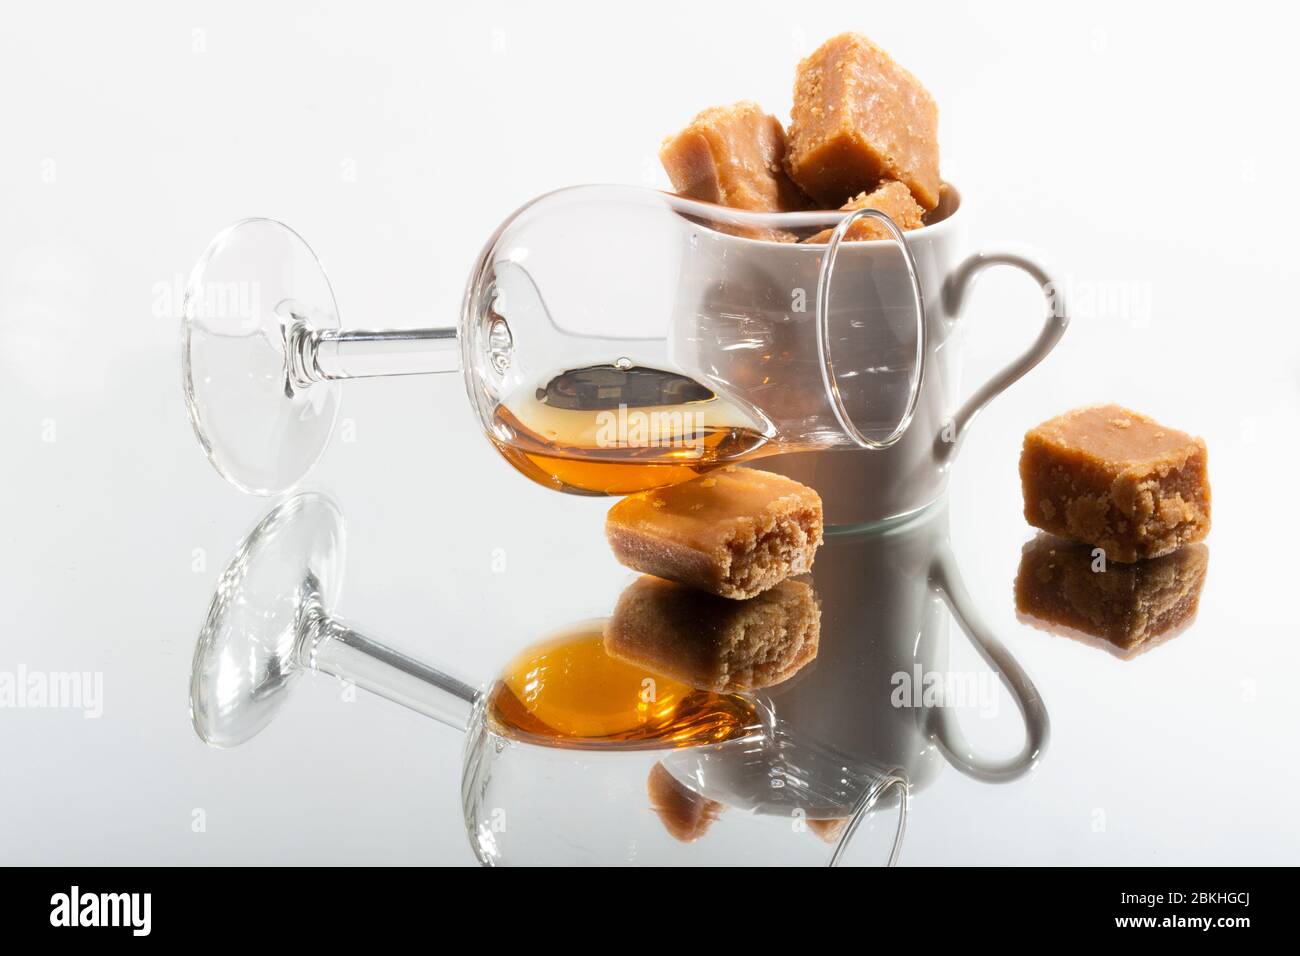 A dram of whisky and Islay tablet Stock Photo